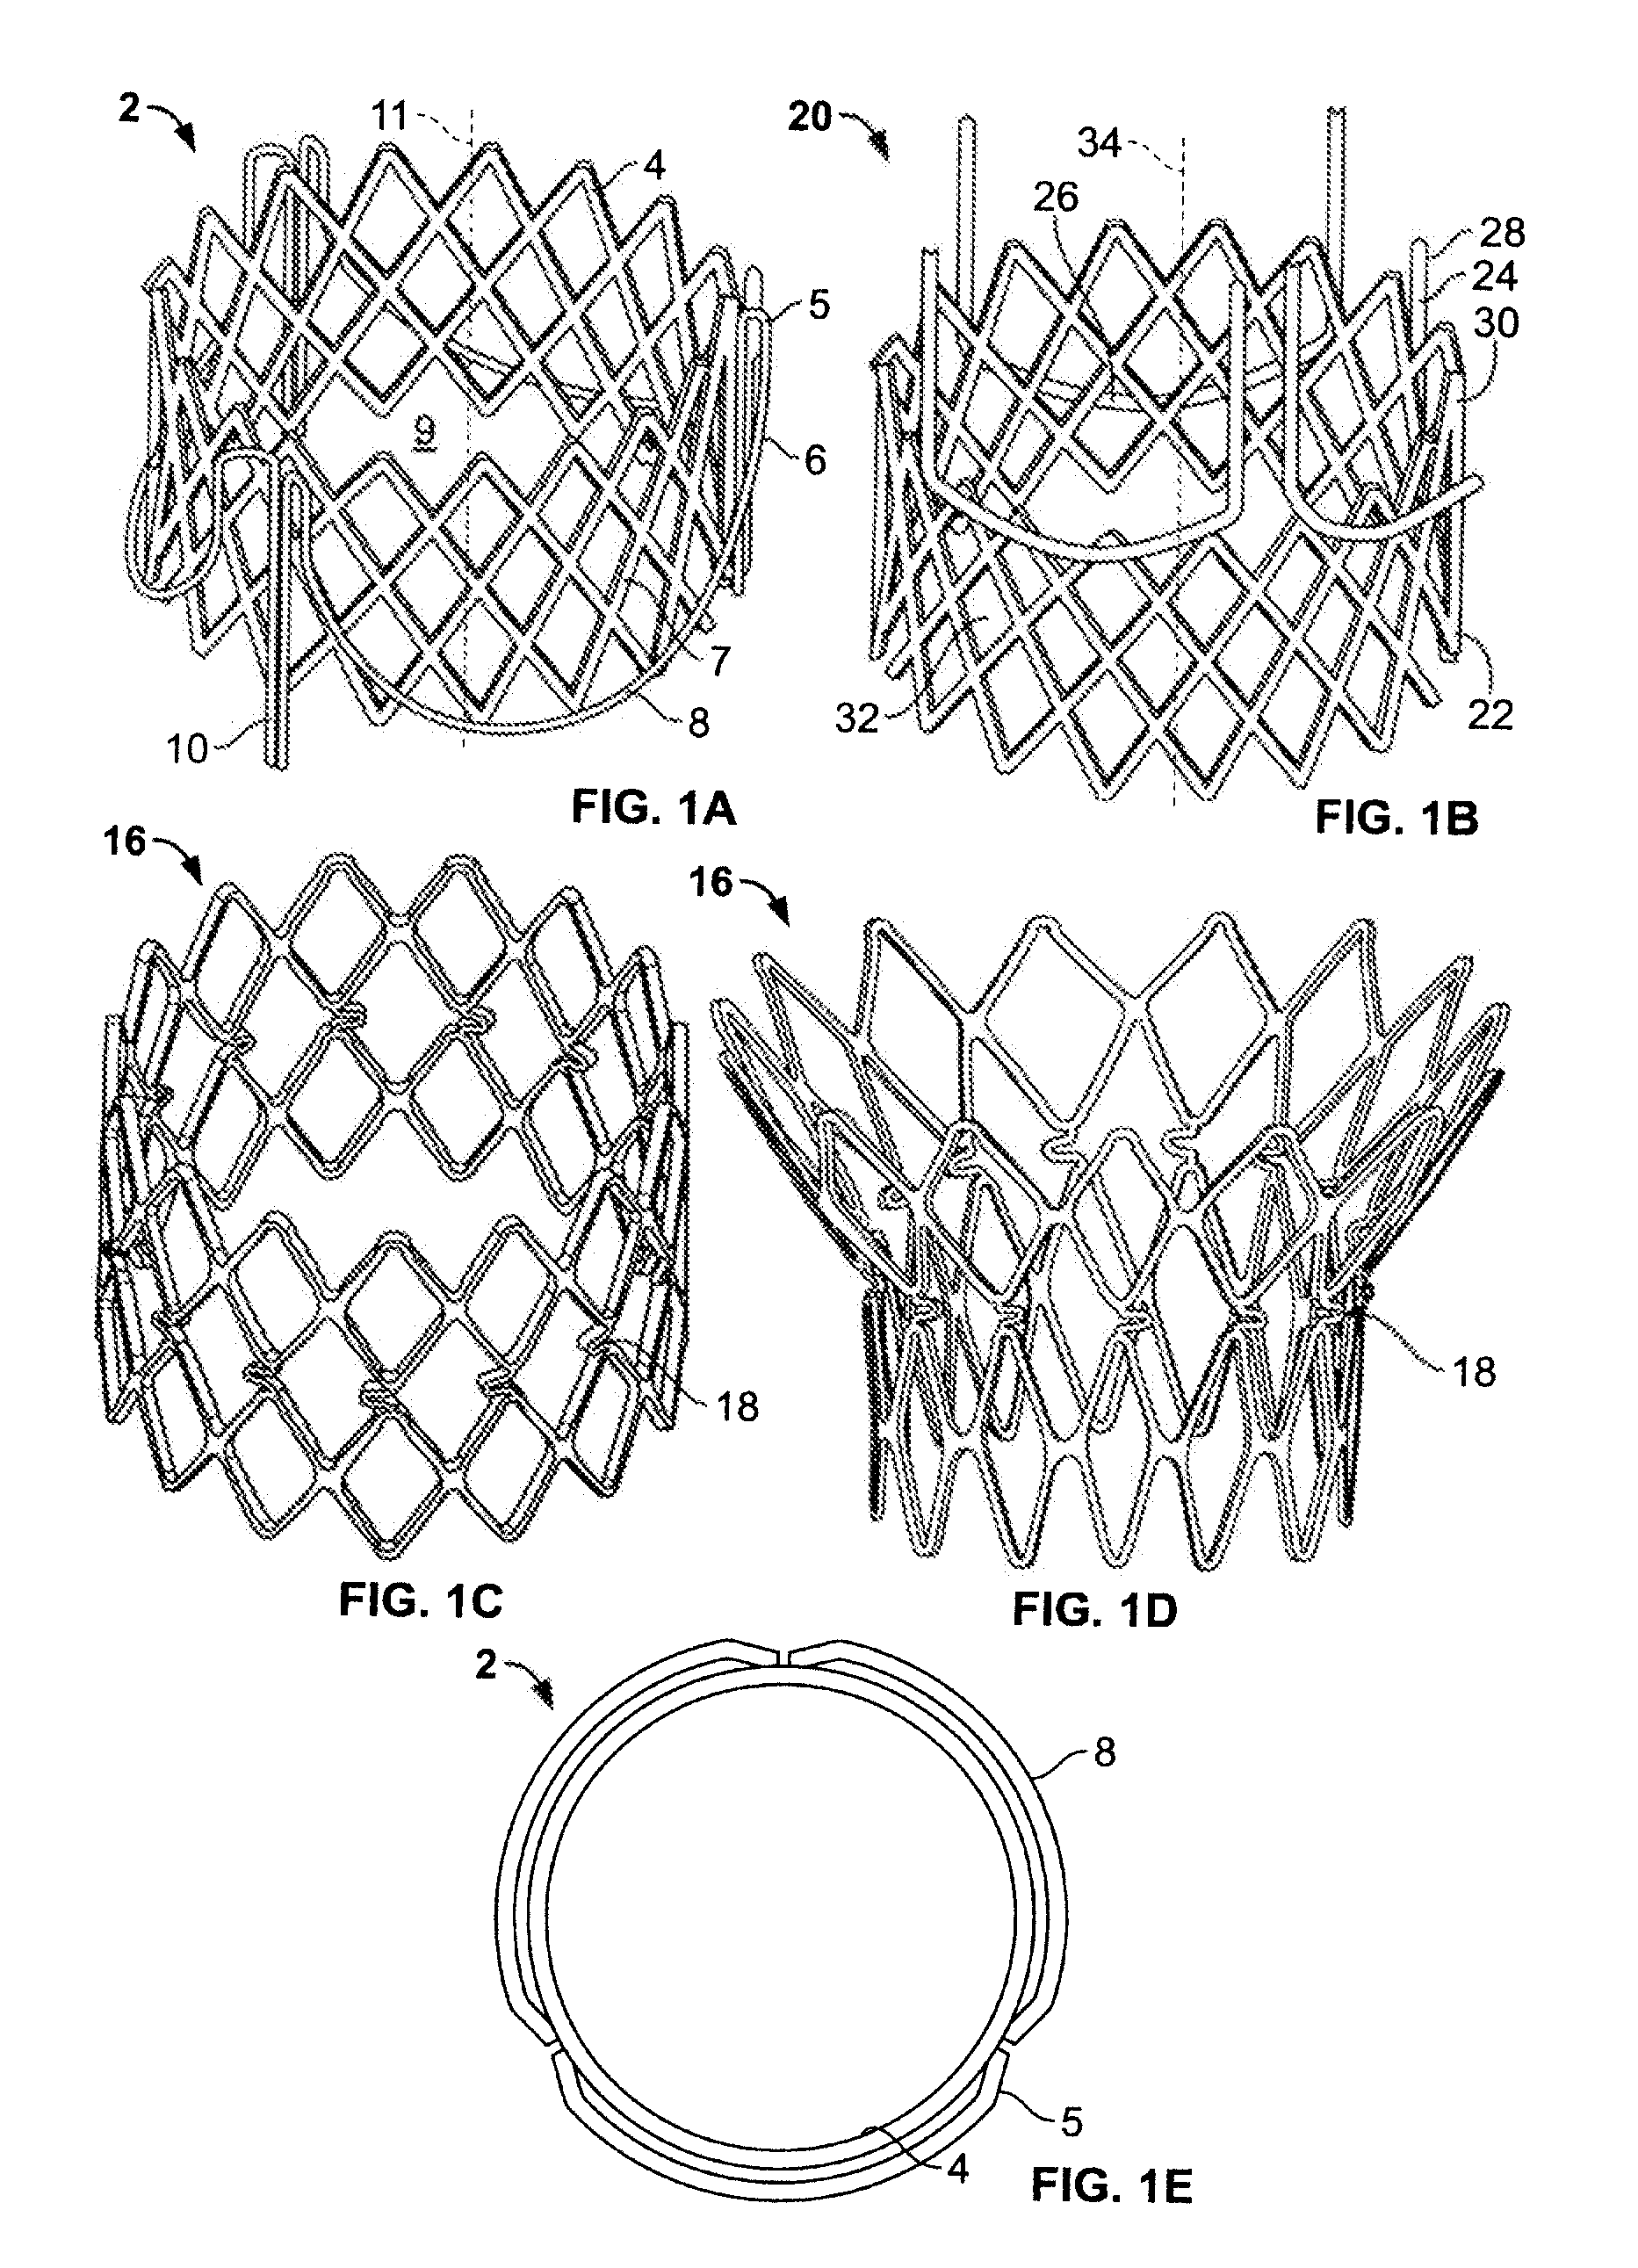 Methods for delivery of a sutureless pulmonary or mitral valve